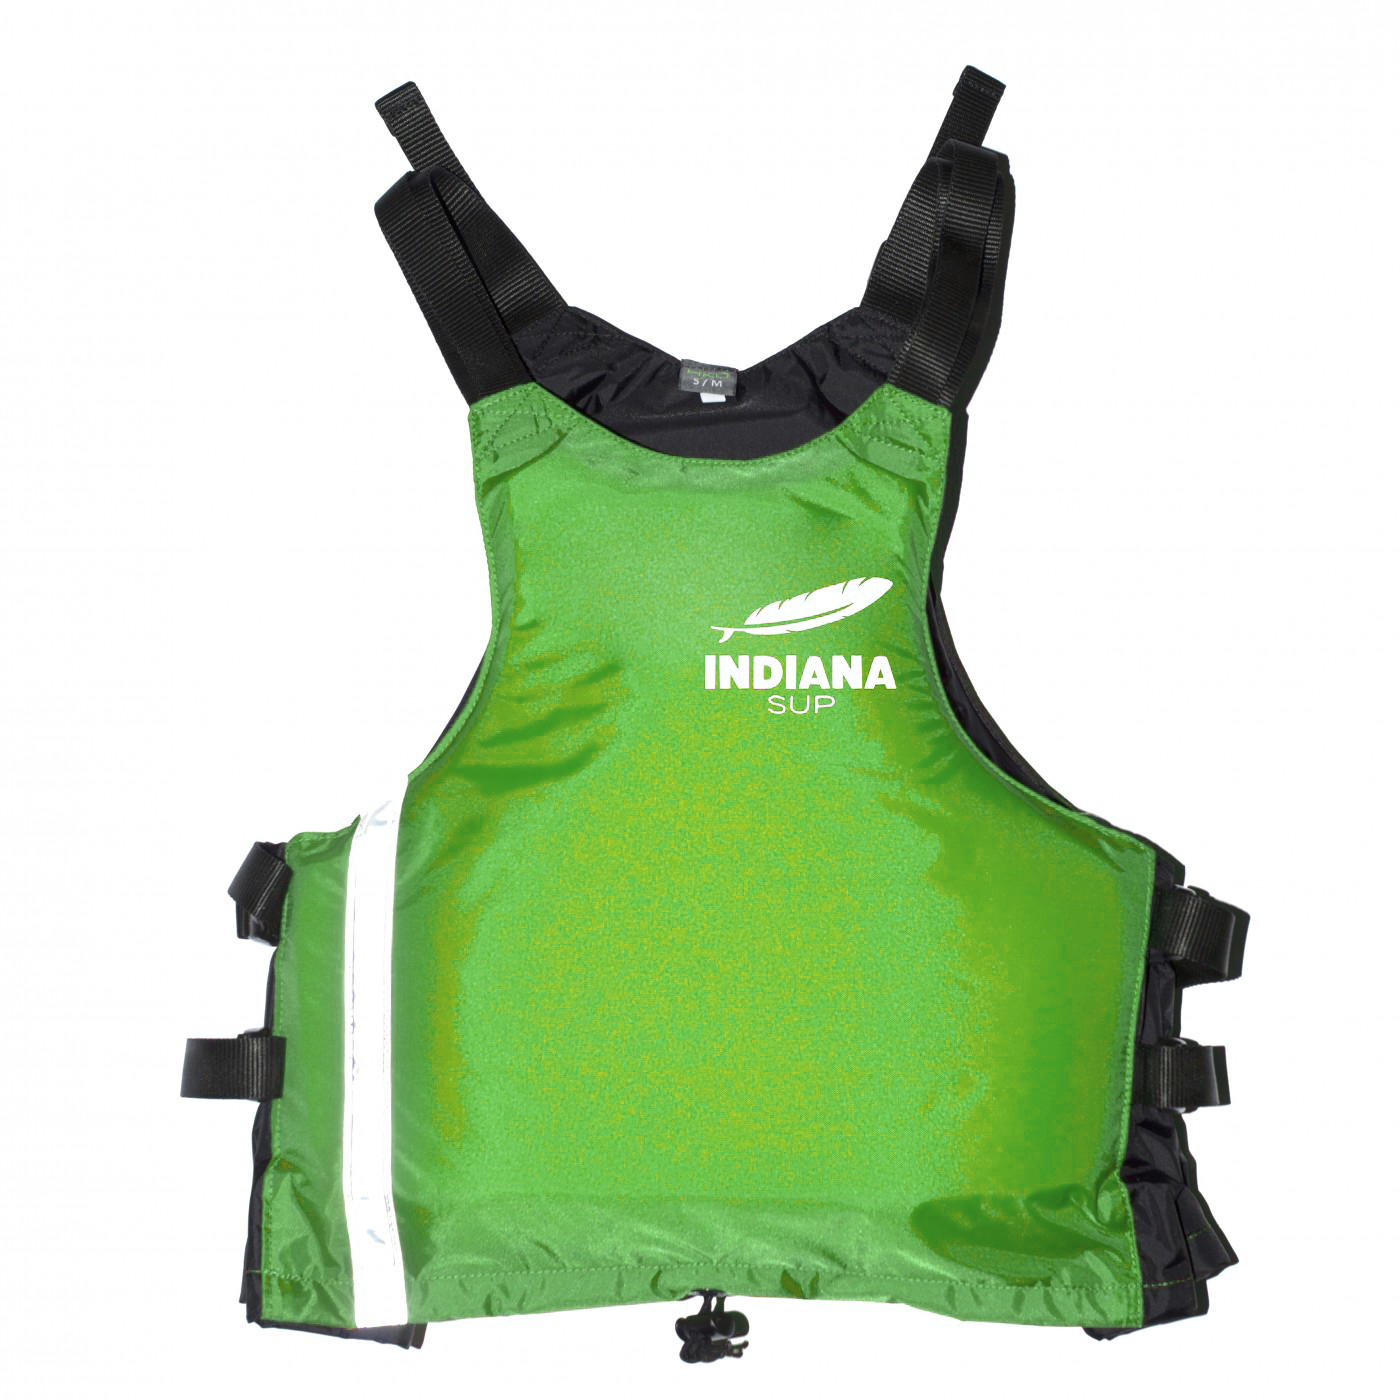 Indiana Swift Vest Kids (ISO Norm 12402-5) green